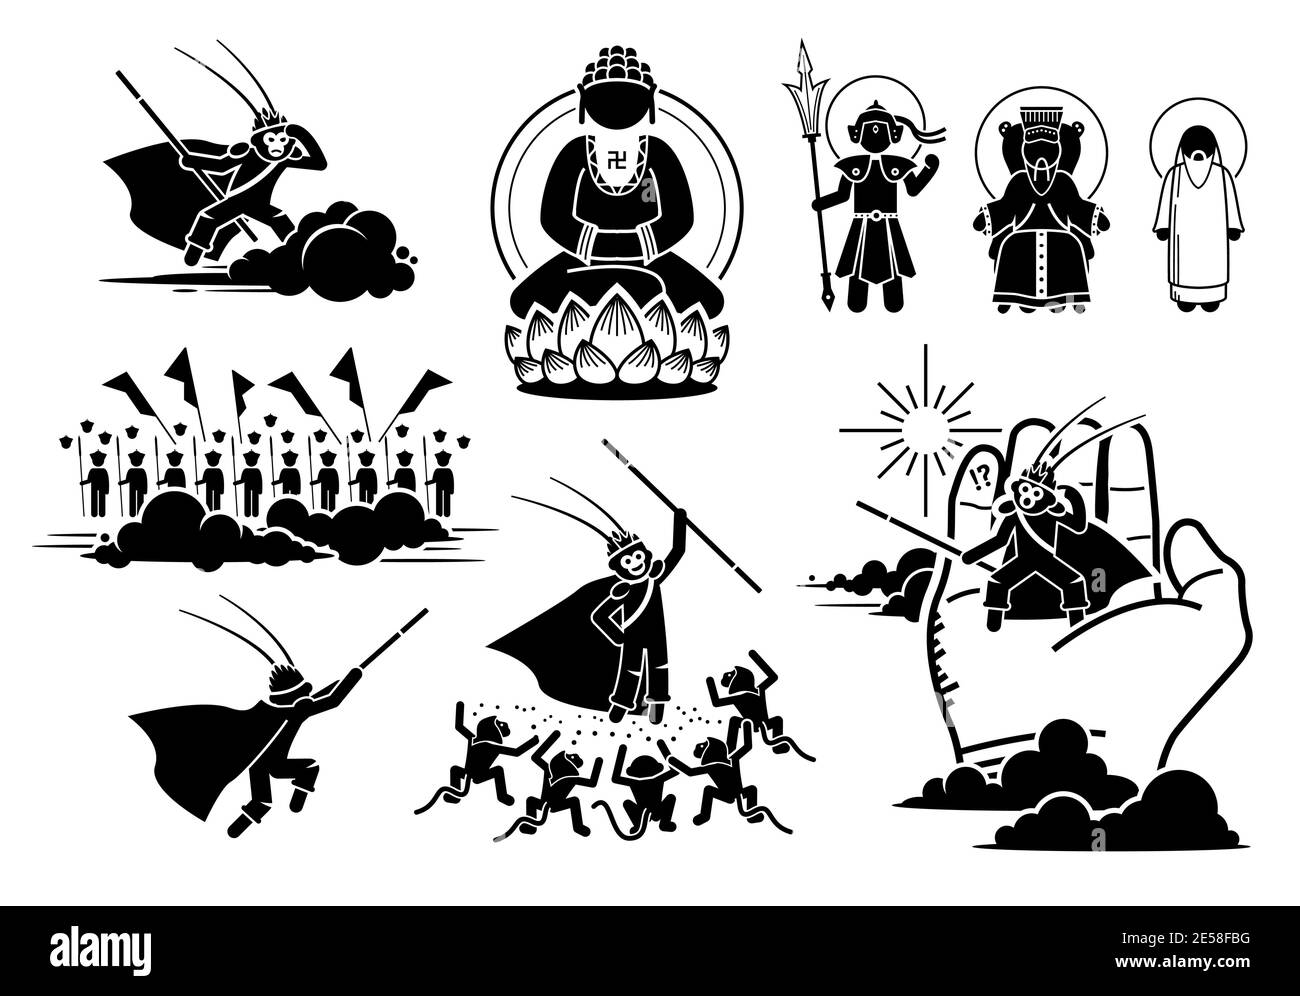 Journey to the West, Sun Wukong challenge and fighting at heaven icons. Vector illustrations of Monkey King vs Gods and Buddha. Stock Vector